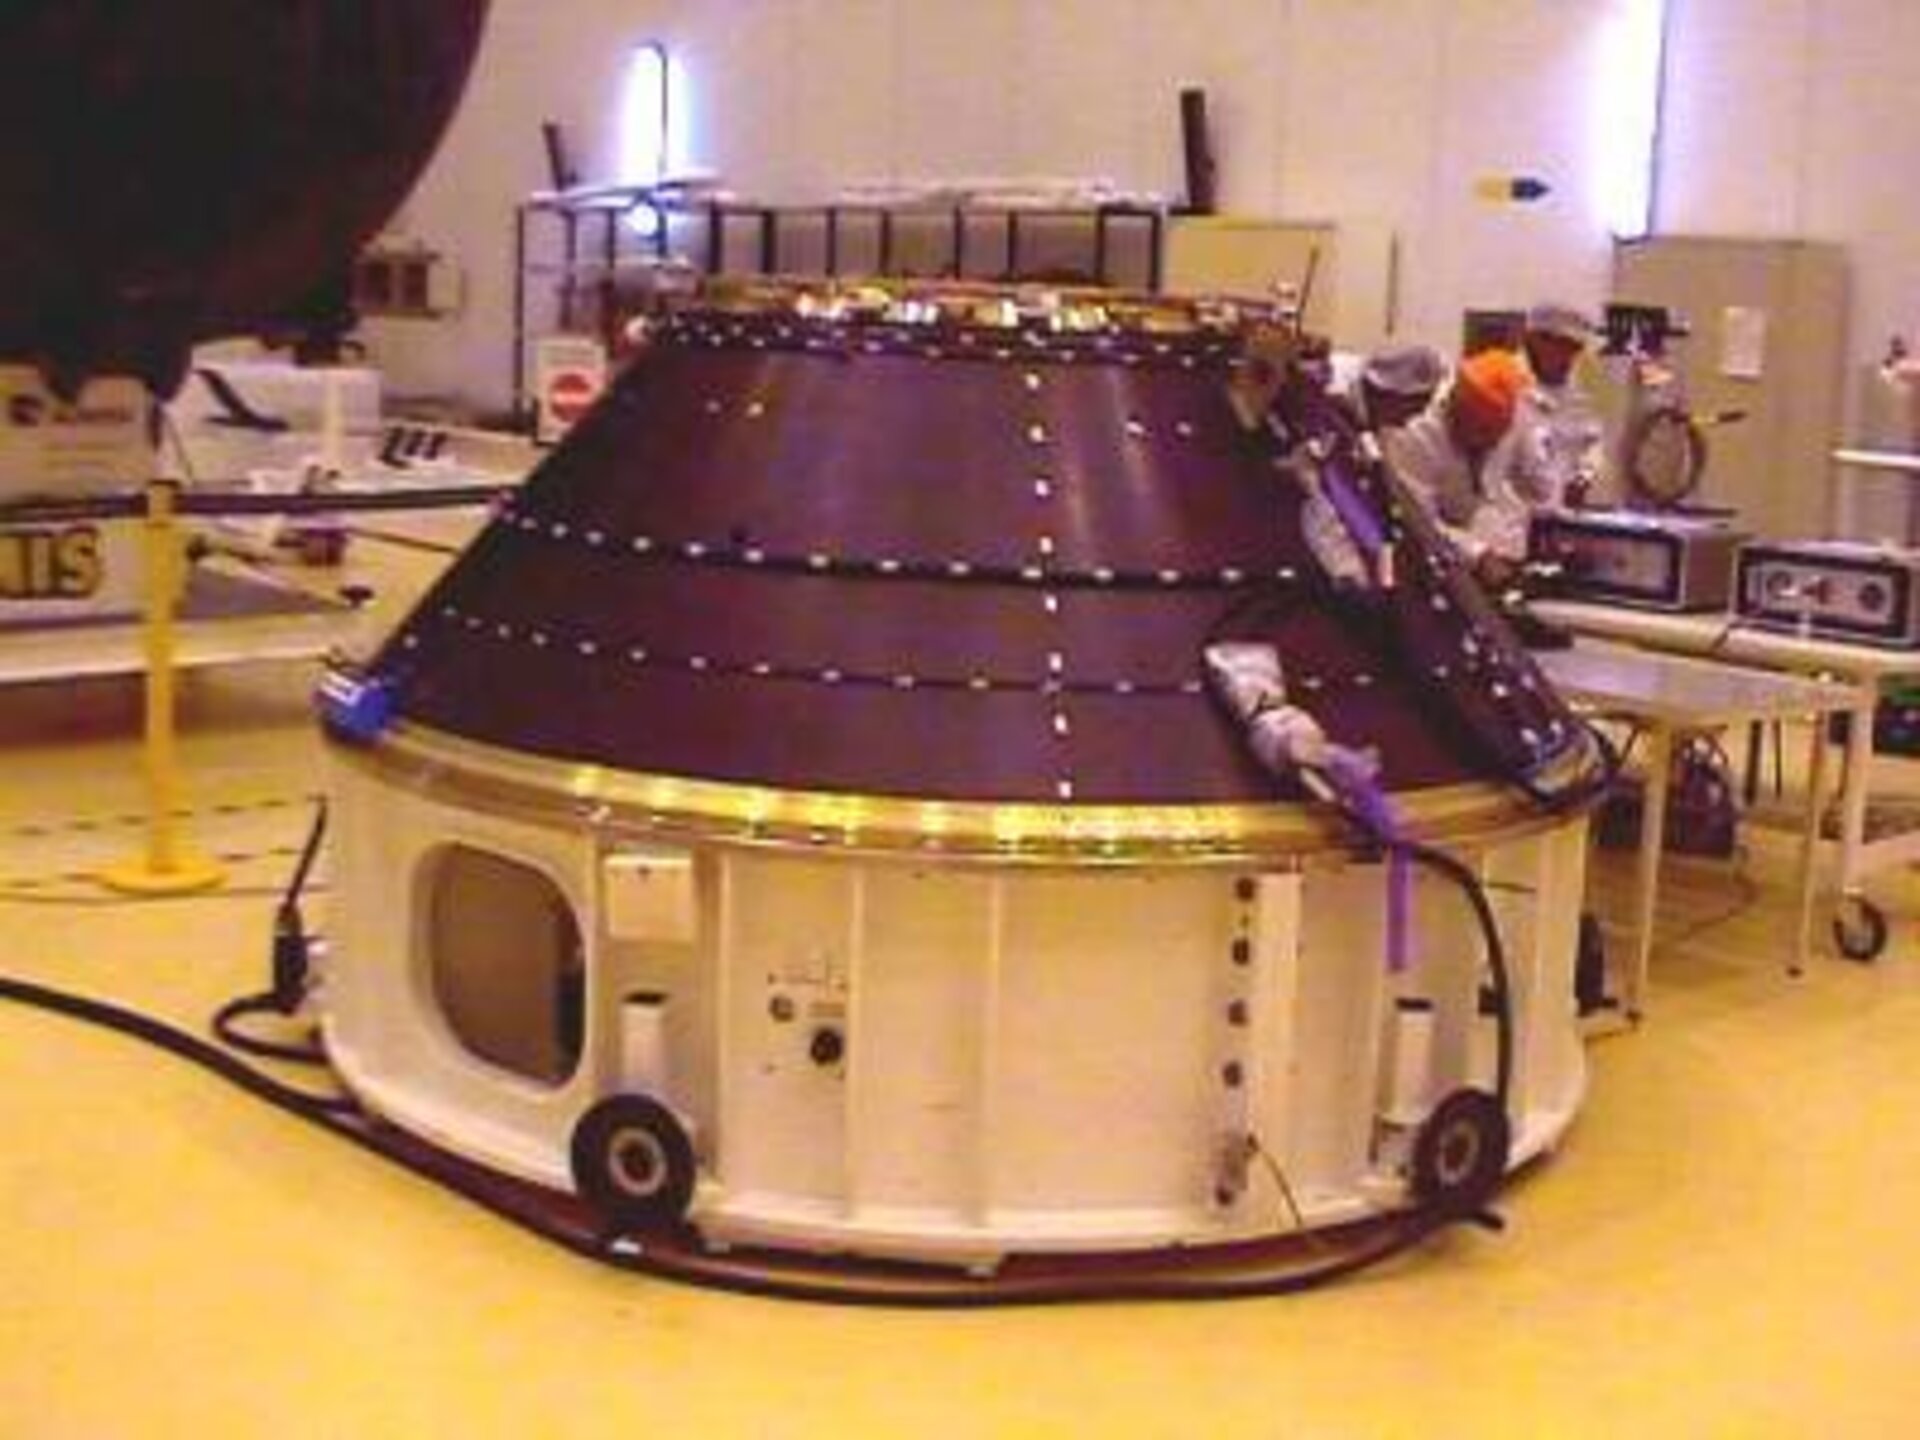 The ACU Ariane adapter onto which Artemis is directly mounted